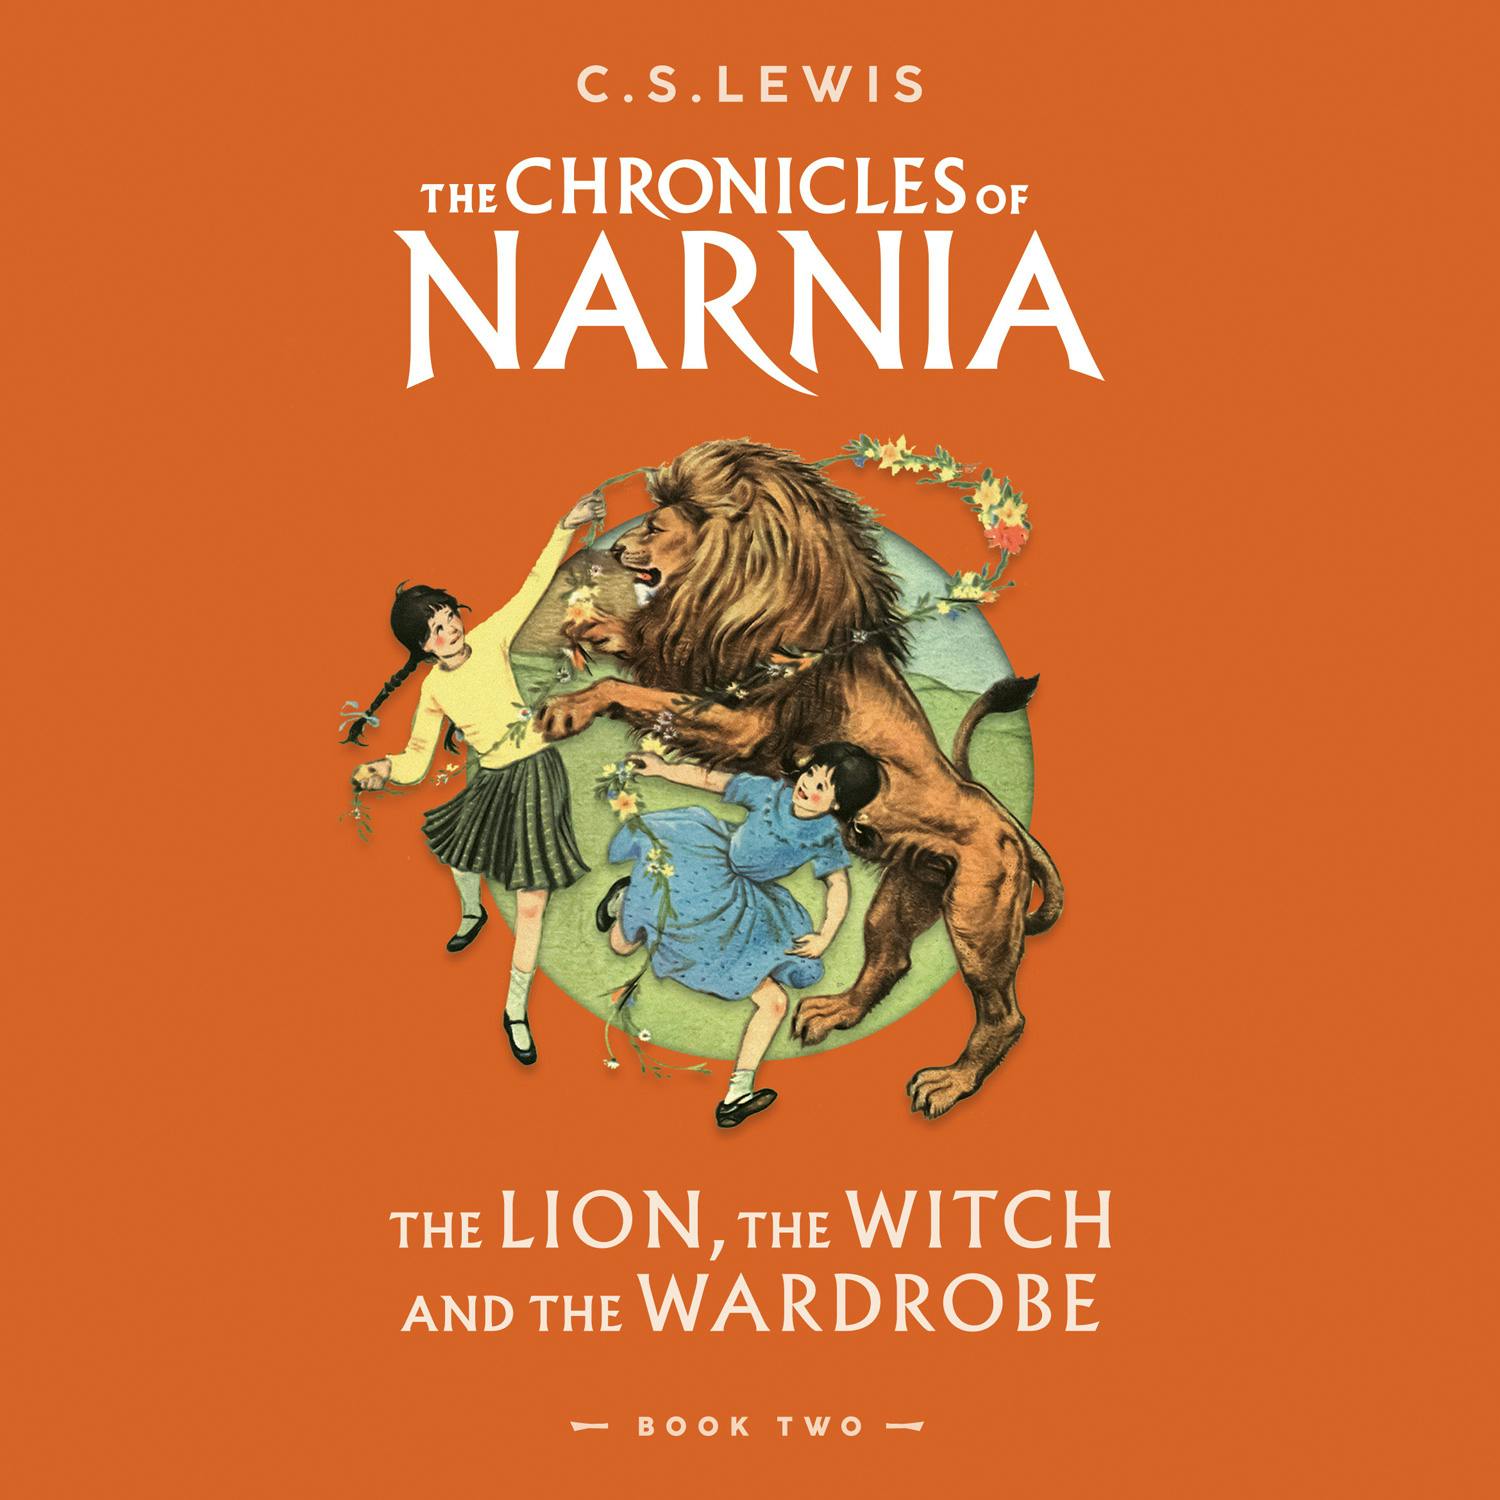 The Lion, the Witch and the Wardrobe: Abridged - undefined